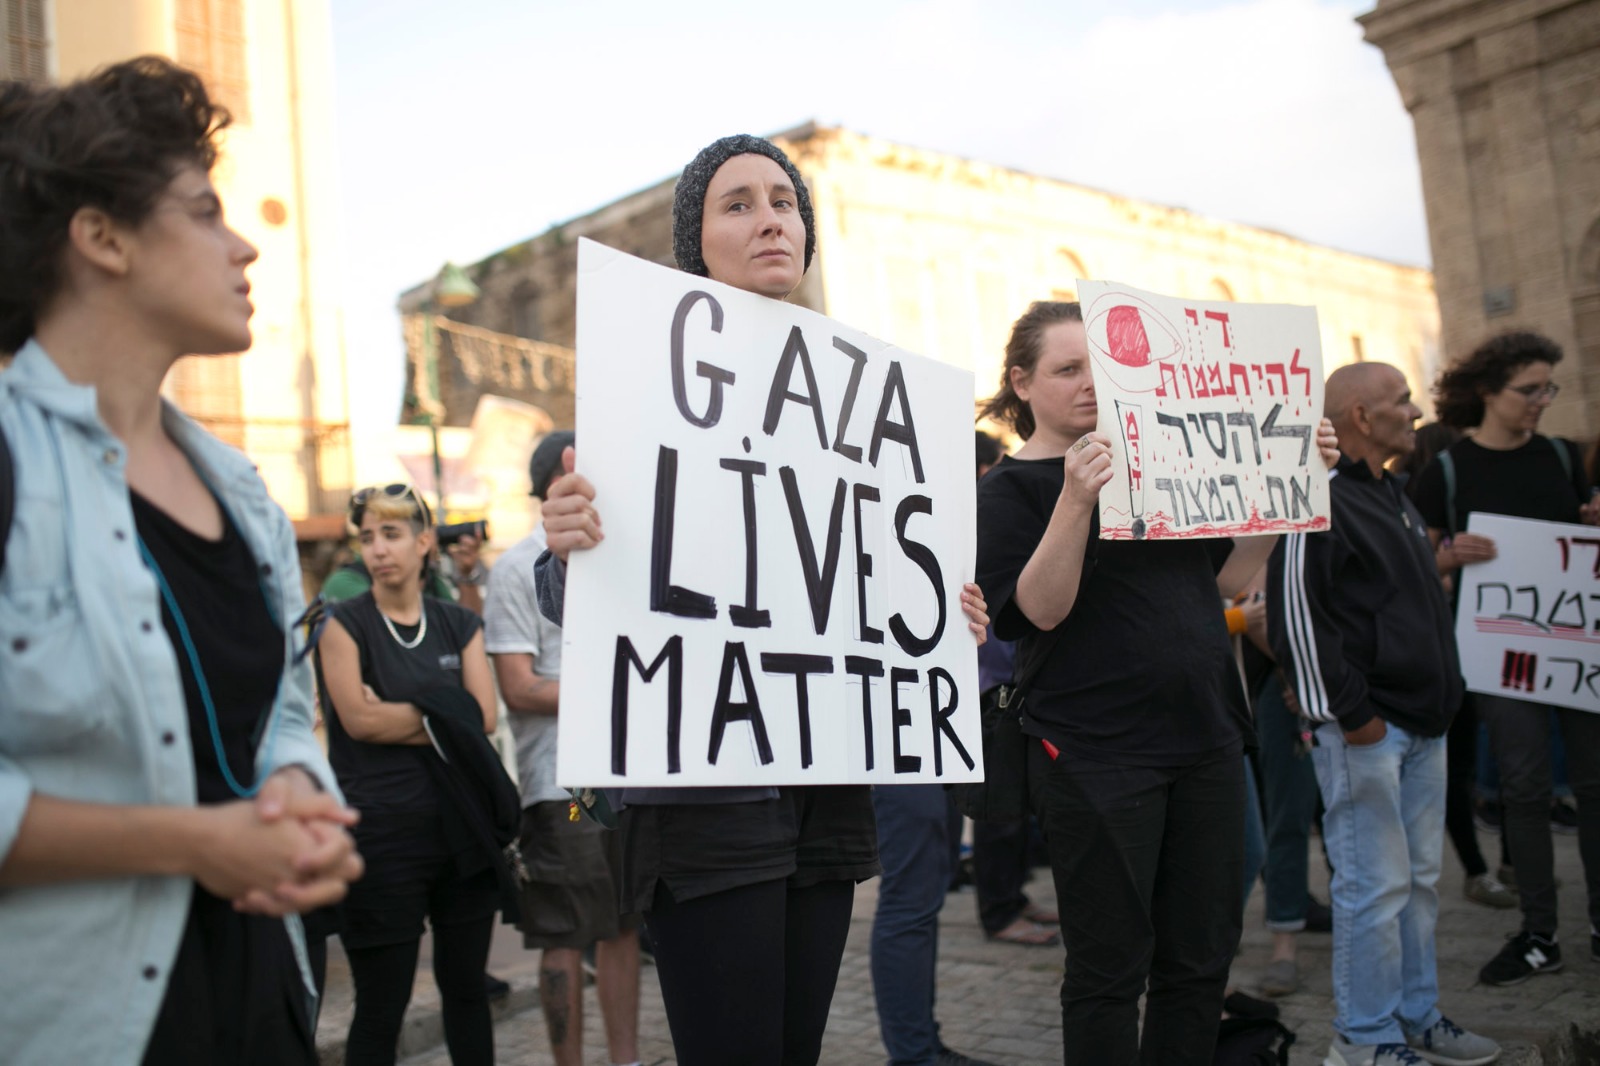 Dozens of Palestinians and Israelis protest the killing of unarmed protesters in Gaza at Jaffa's Clock Square, May 15, 2018. (Shiraz Grinbaum/Activestills.org)